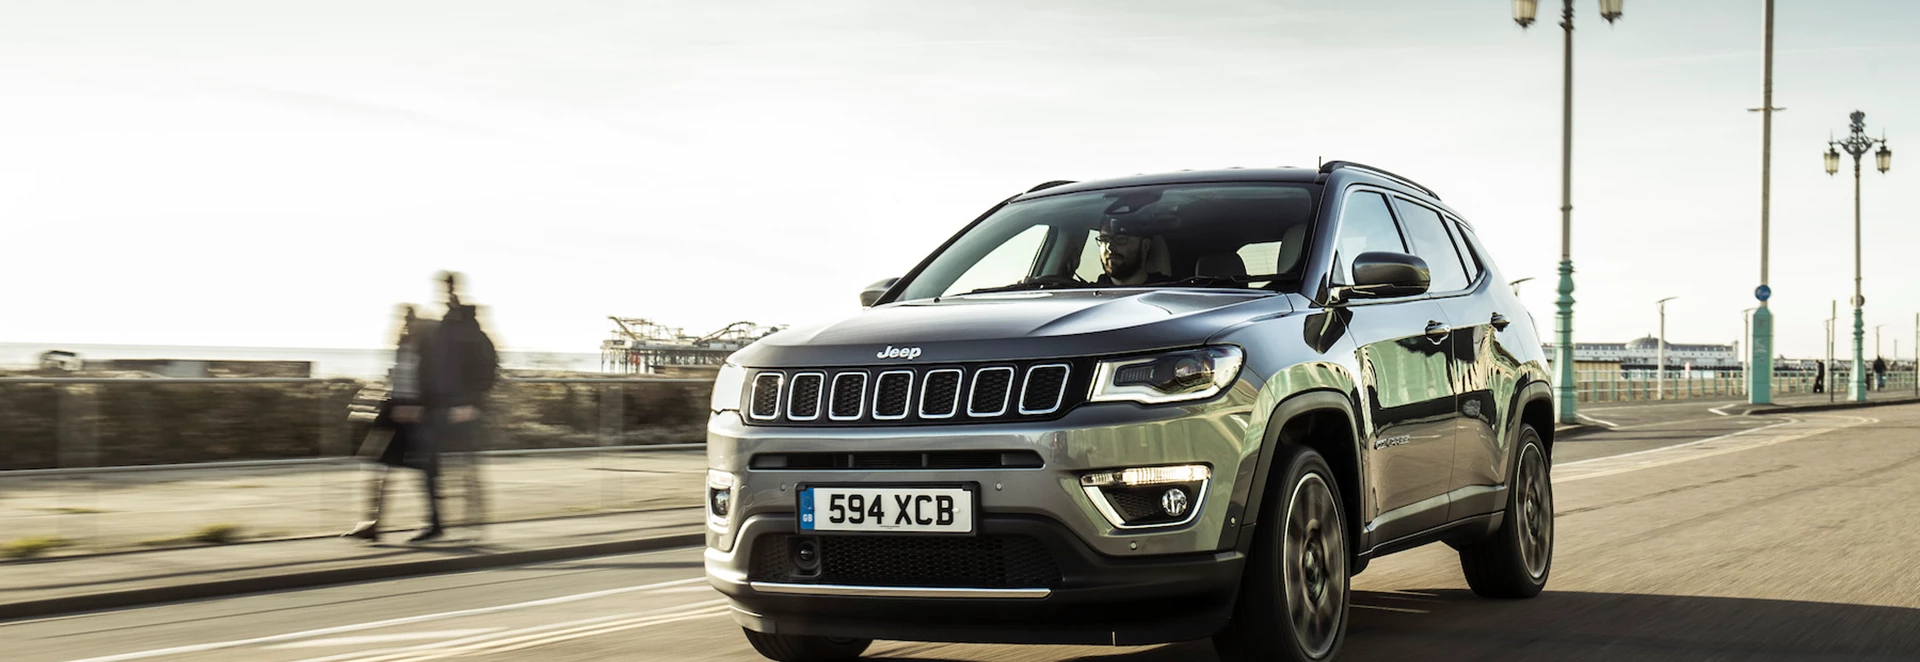 Jeep Compass 2019 review